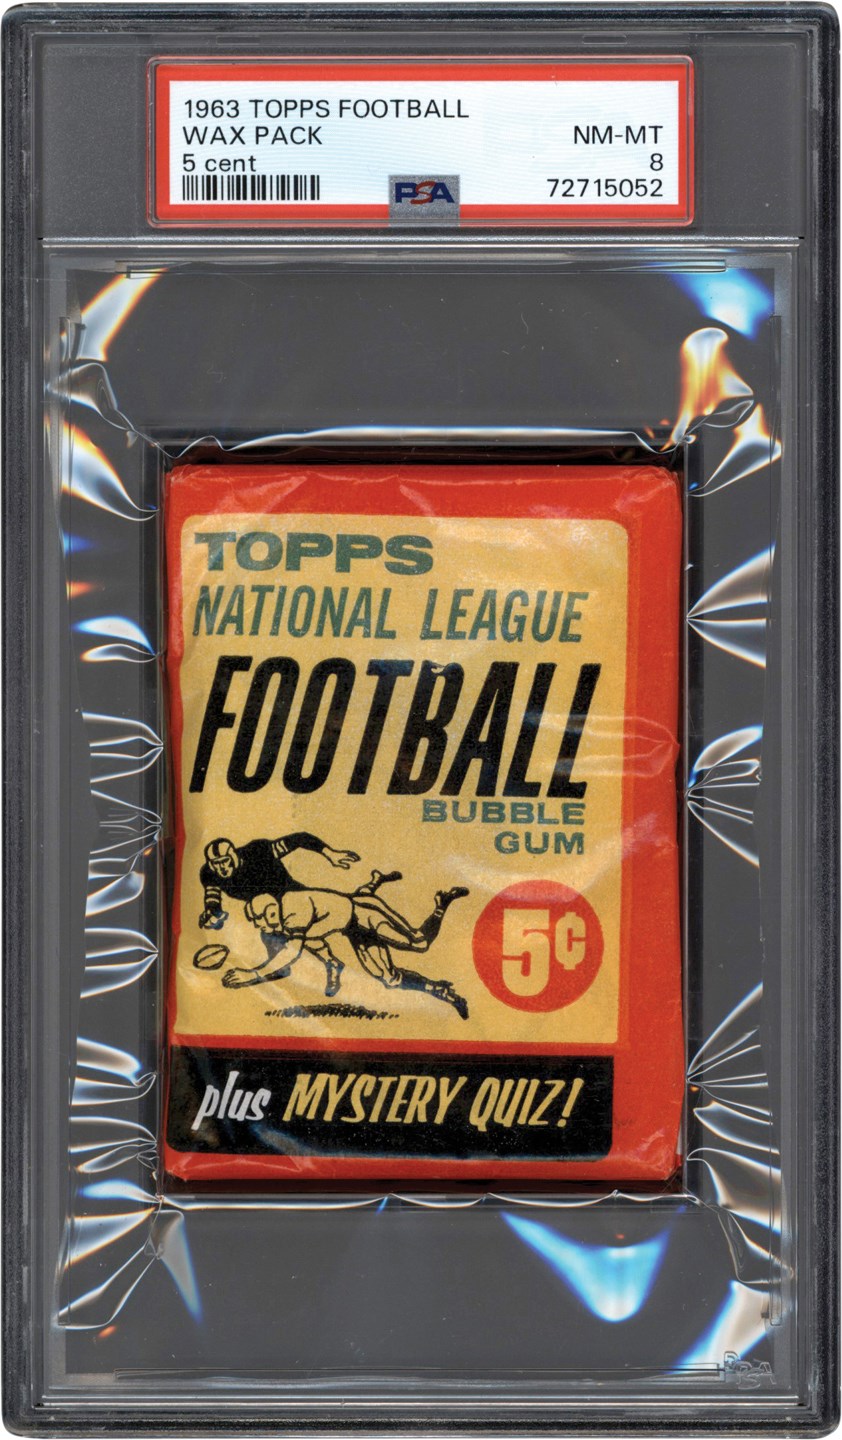 Unopened Boxes, Packs And Cases - 1963 Topps Football 5-Cent Wax Pack PSA NM-MT 8